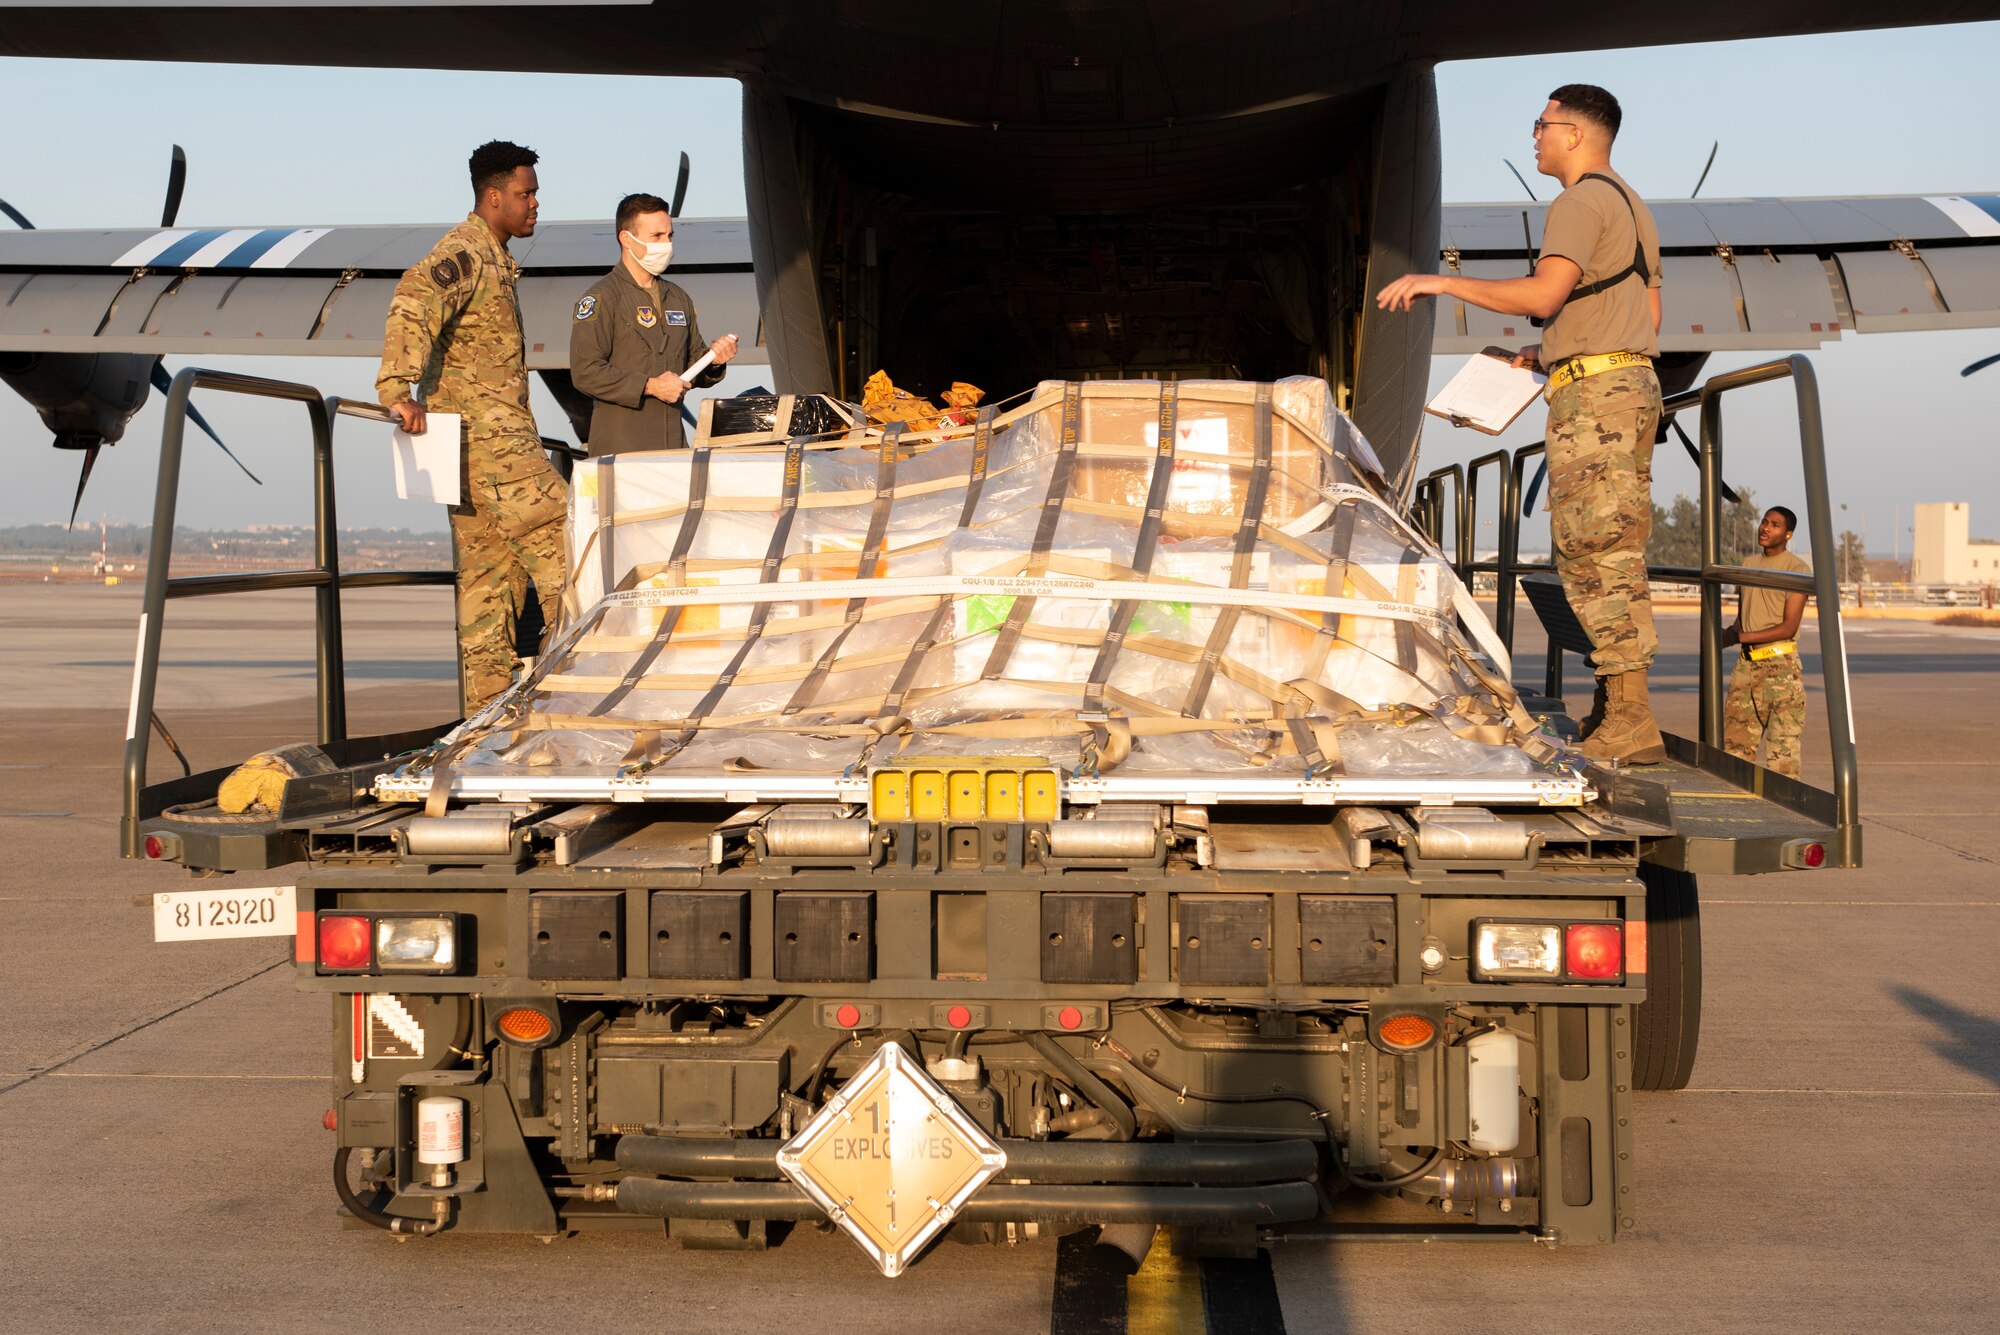 Three Airmen stand on a cargo loading truck, which is unloading from the back of a large propeller cargo aircraft.